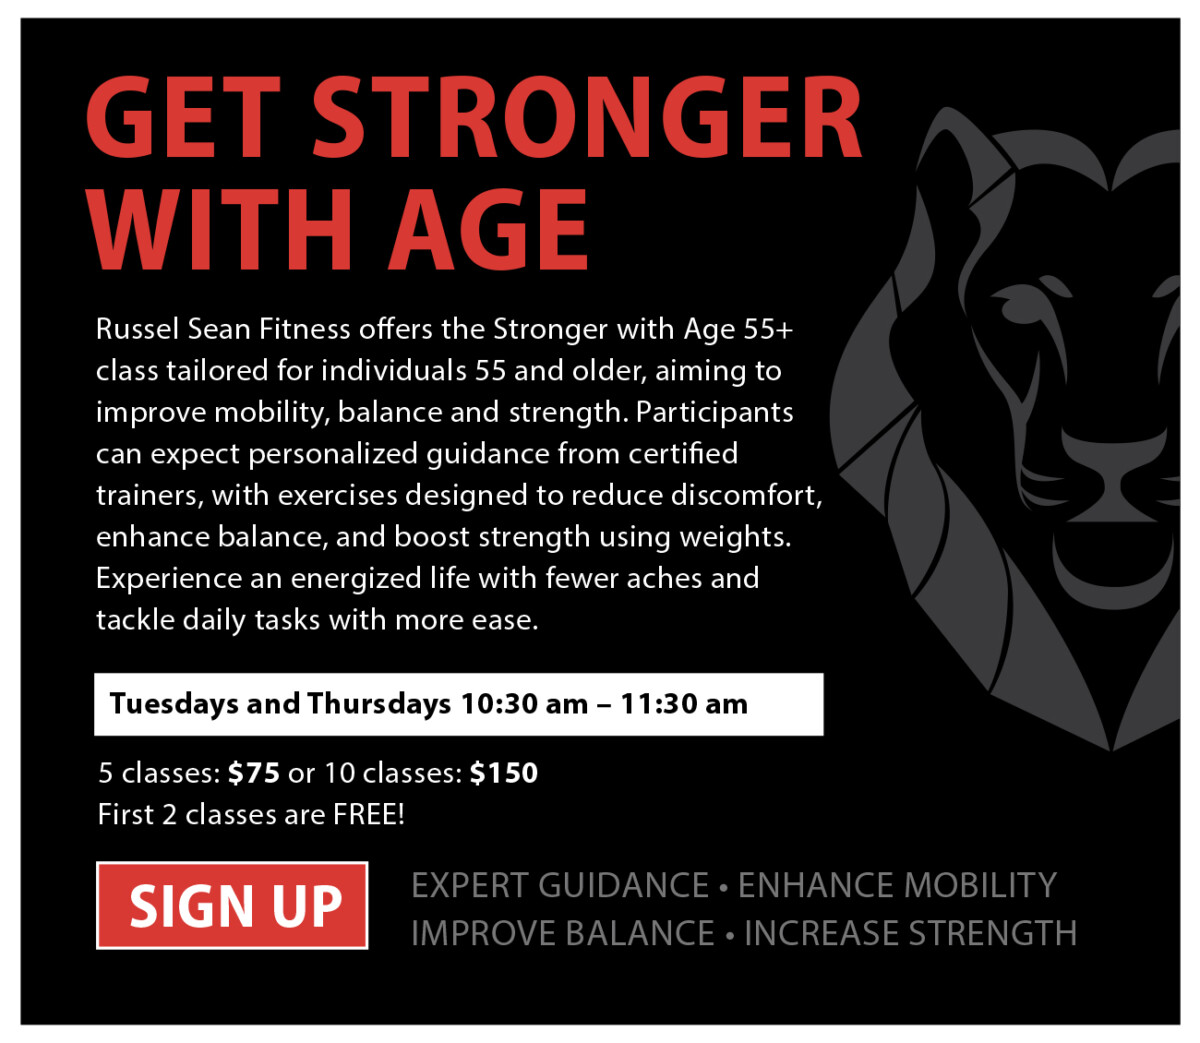 Get Stronger with Age. Sign Up Today!